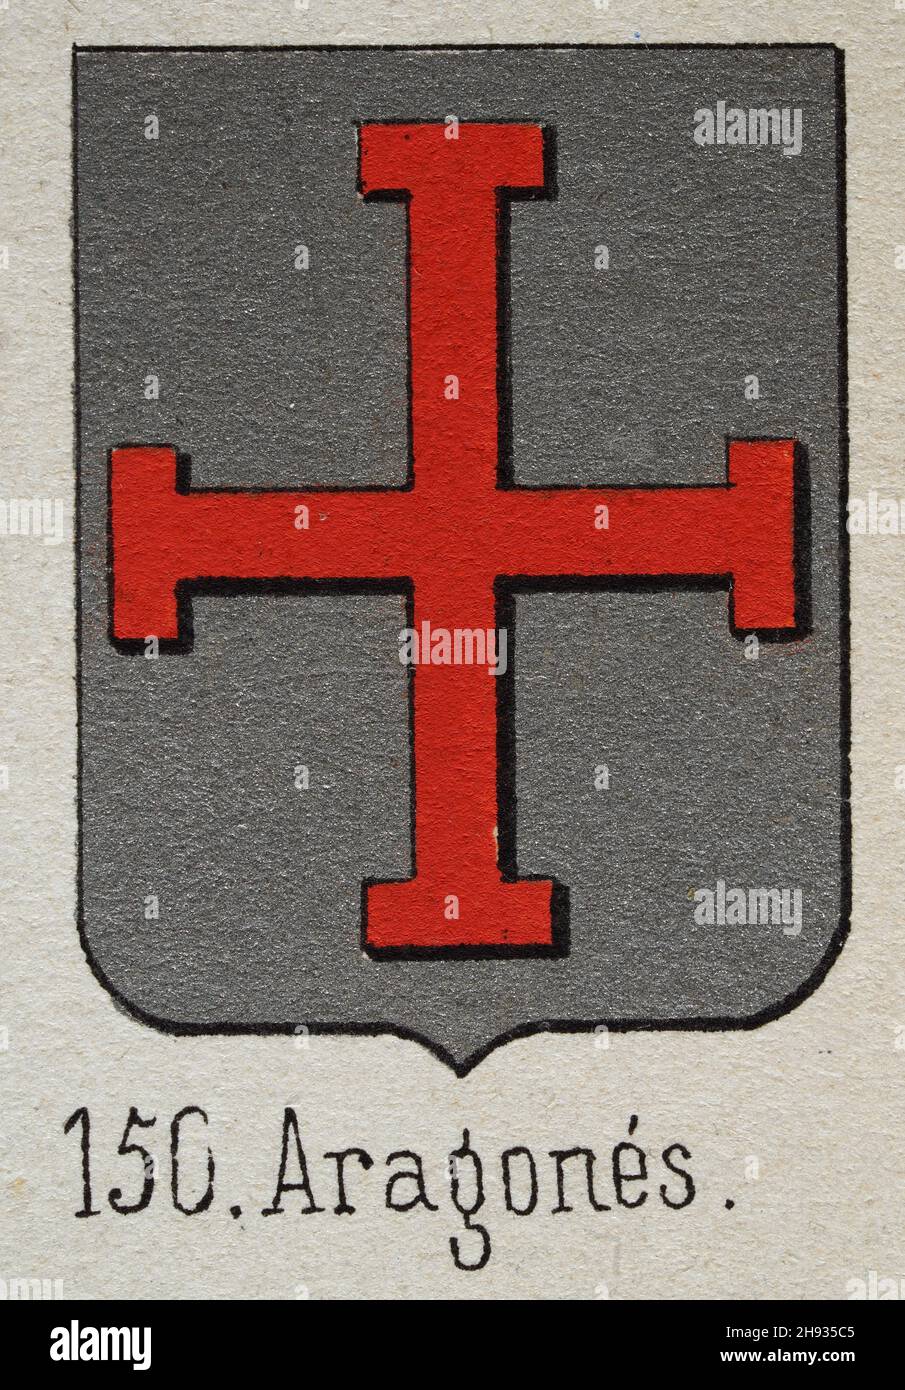 Aragones heraldry, Illustration of a coat of arms, Red cross on silver shield, Heraldric symbols Stock Photo